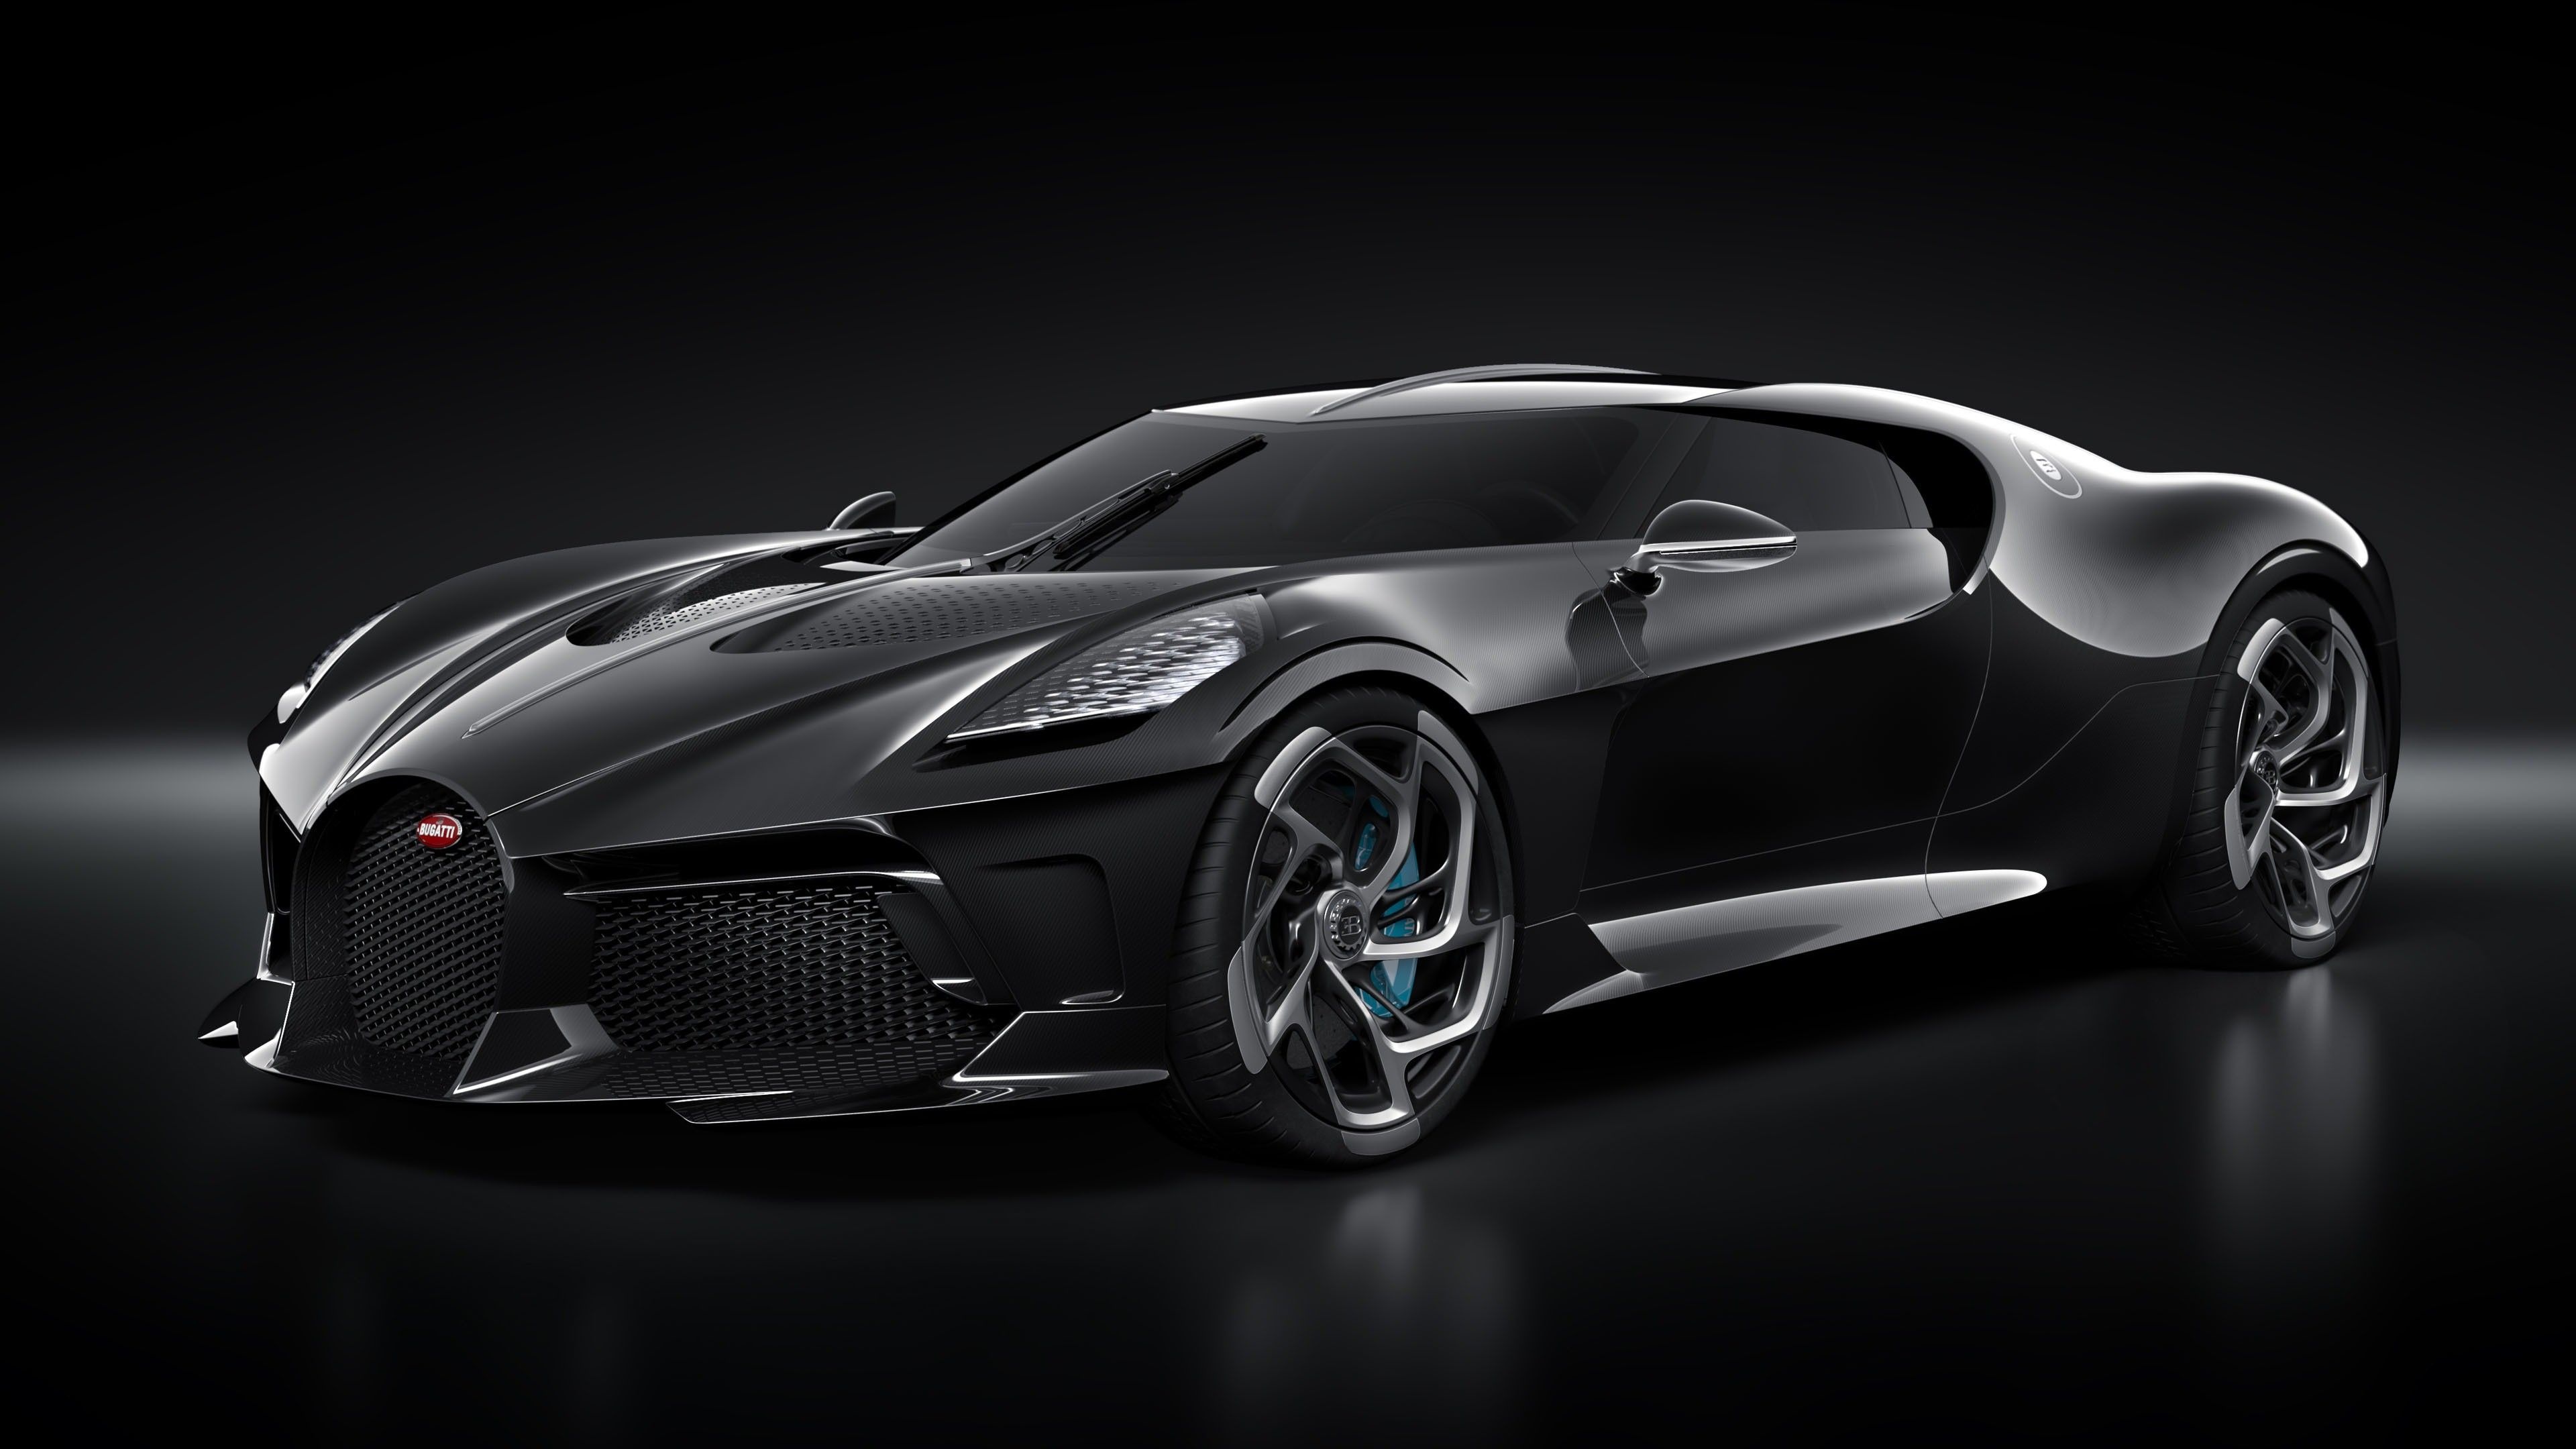 Sports Car: Bugatti La Voiture Noire, Equipped with powerful engine. 3840x2160 4K Wallpaper.